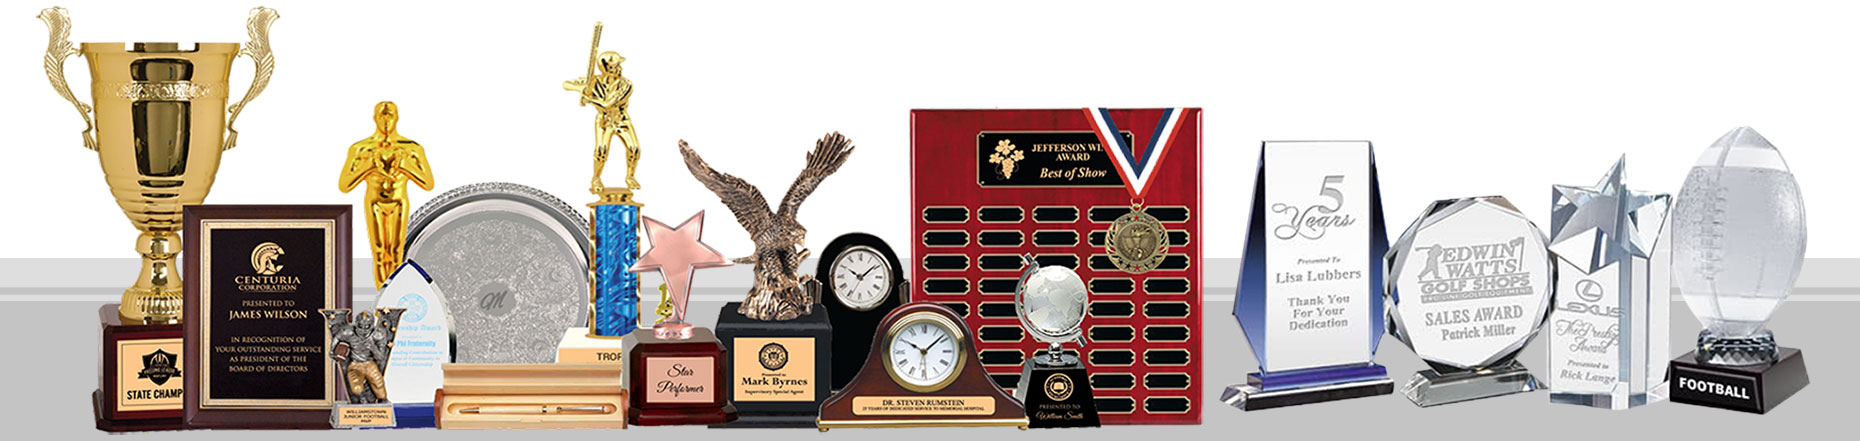 collage of different awards, trophies and plaques in different sizes and colors. Cup trophies, sports trophies, perpetual plaque, clocks, eagle awards, star awards, crystal awards and glass awards, and medals.